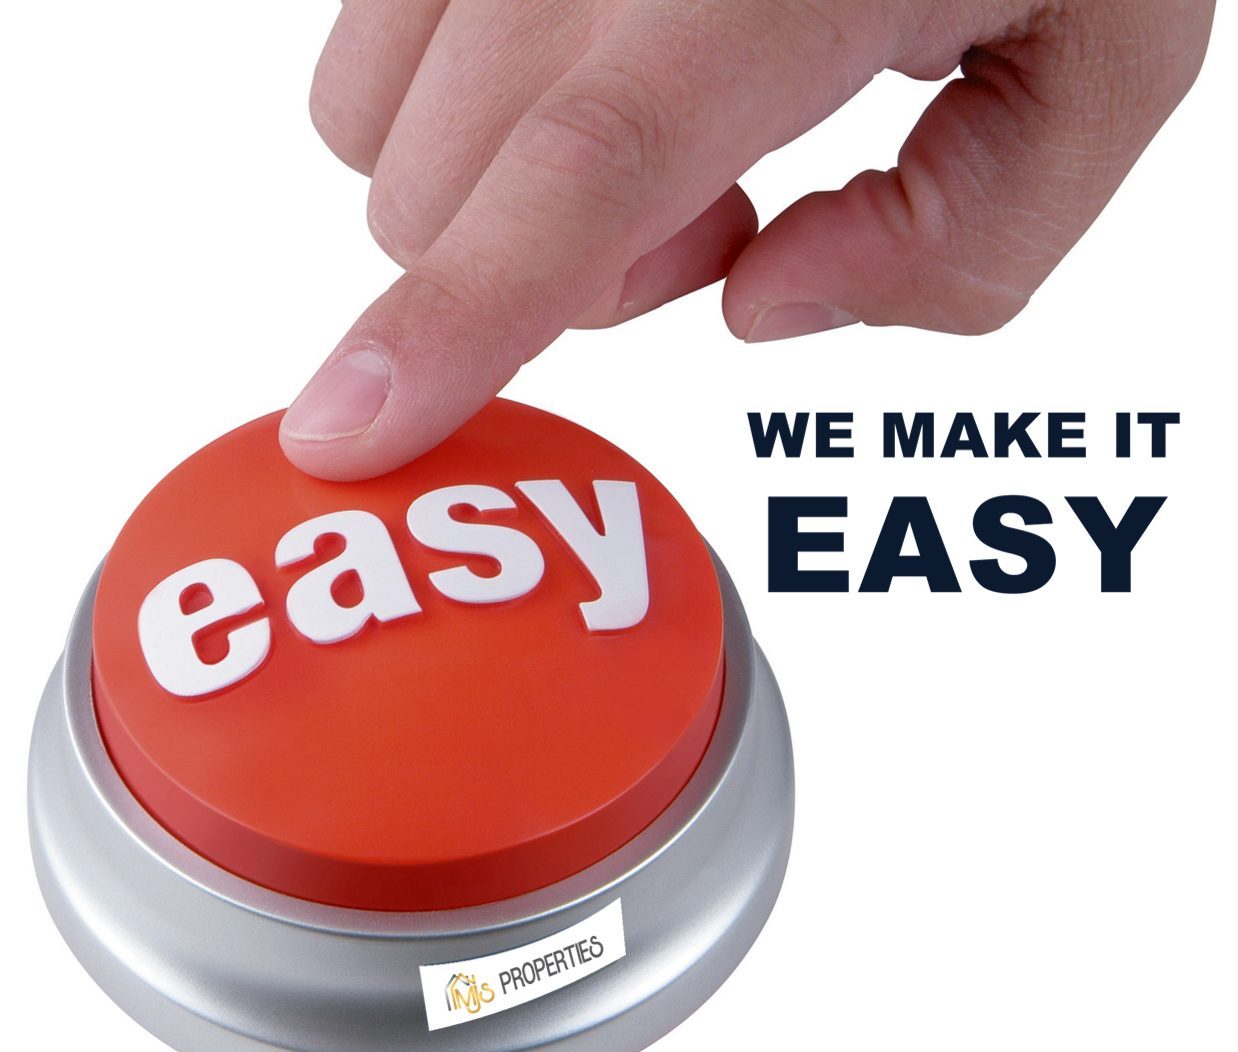 MJS makes it easy button